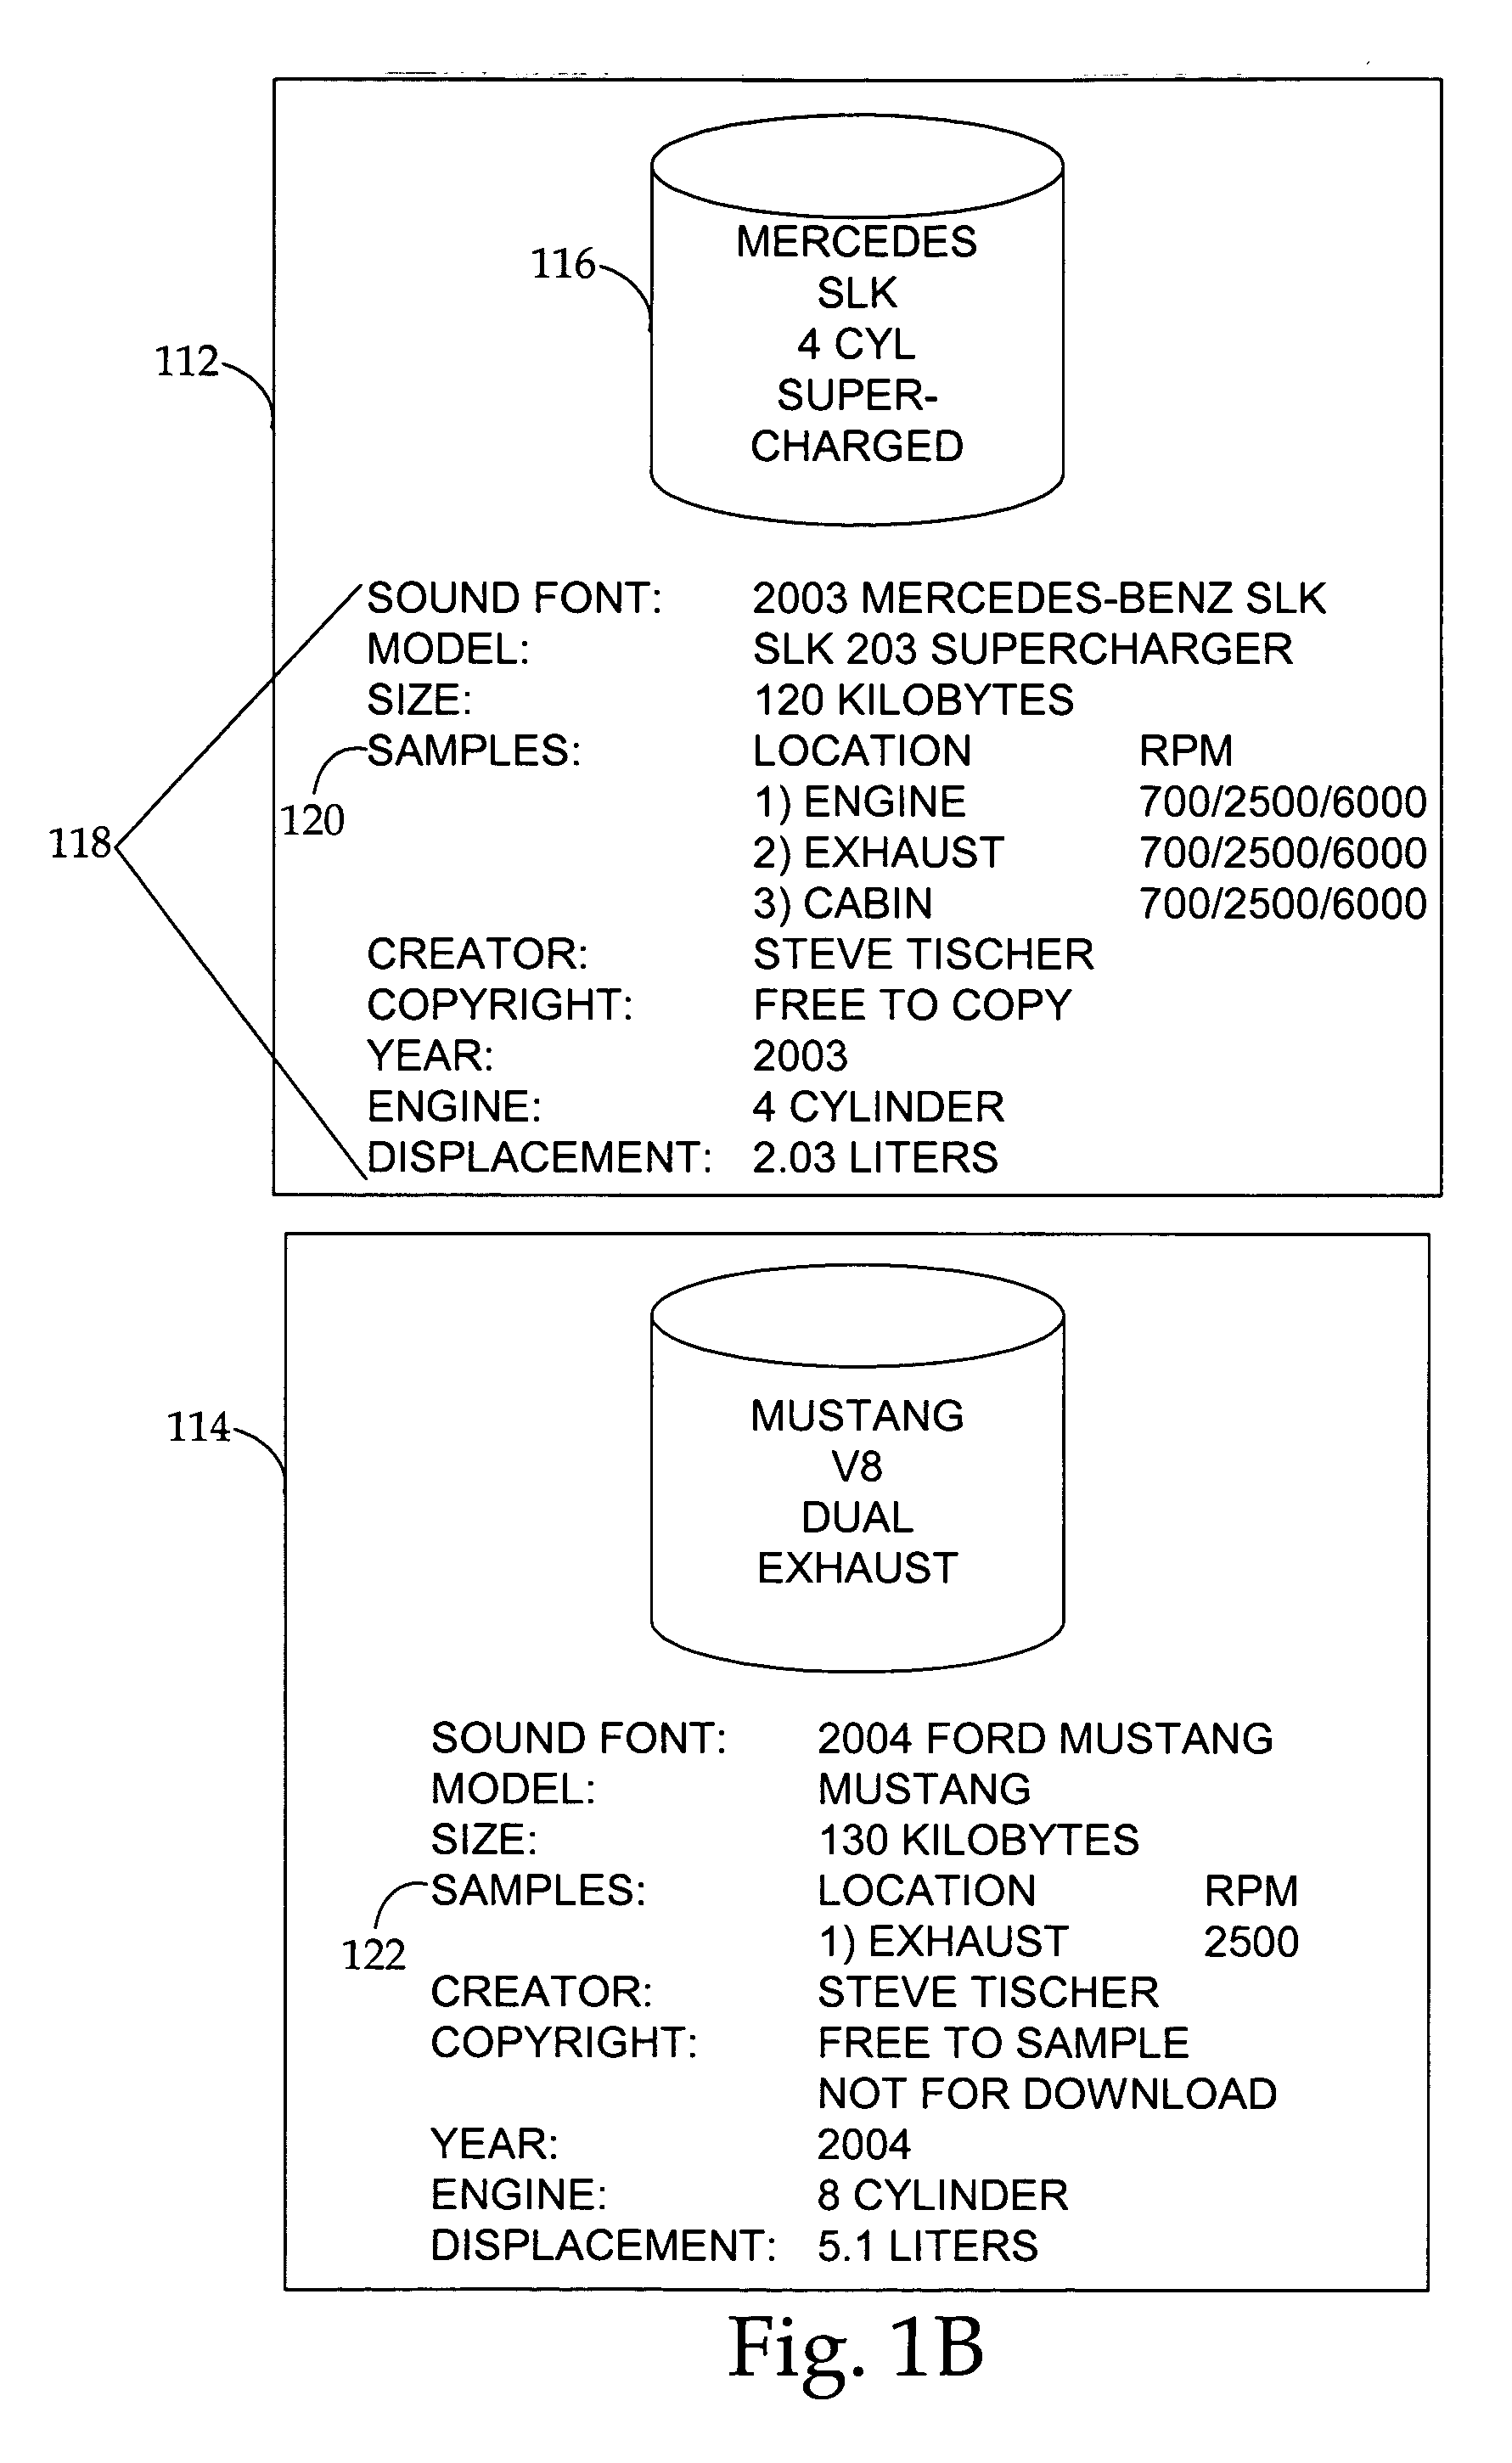 System and methods for vehicle sound font creation, playback, and networking